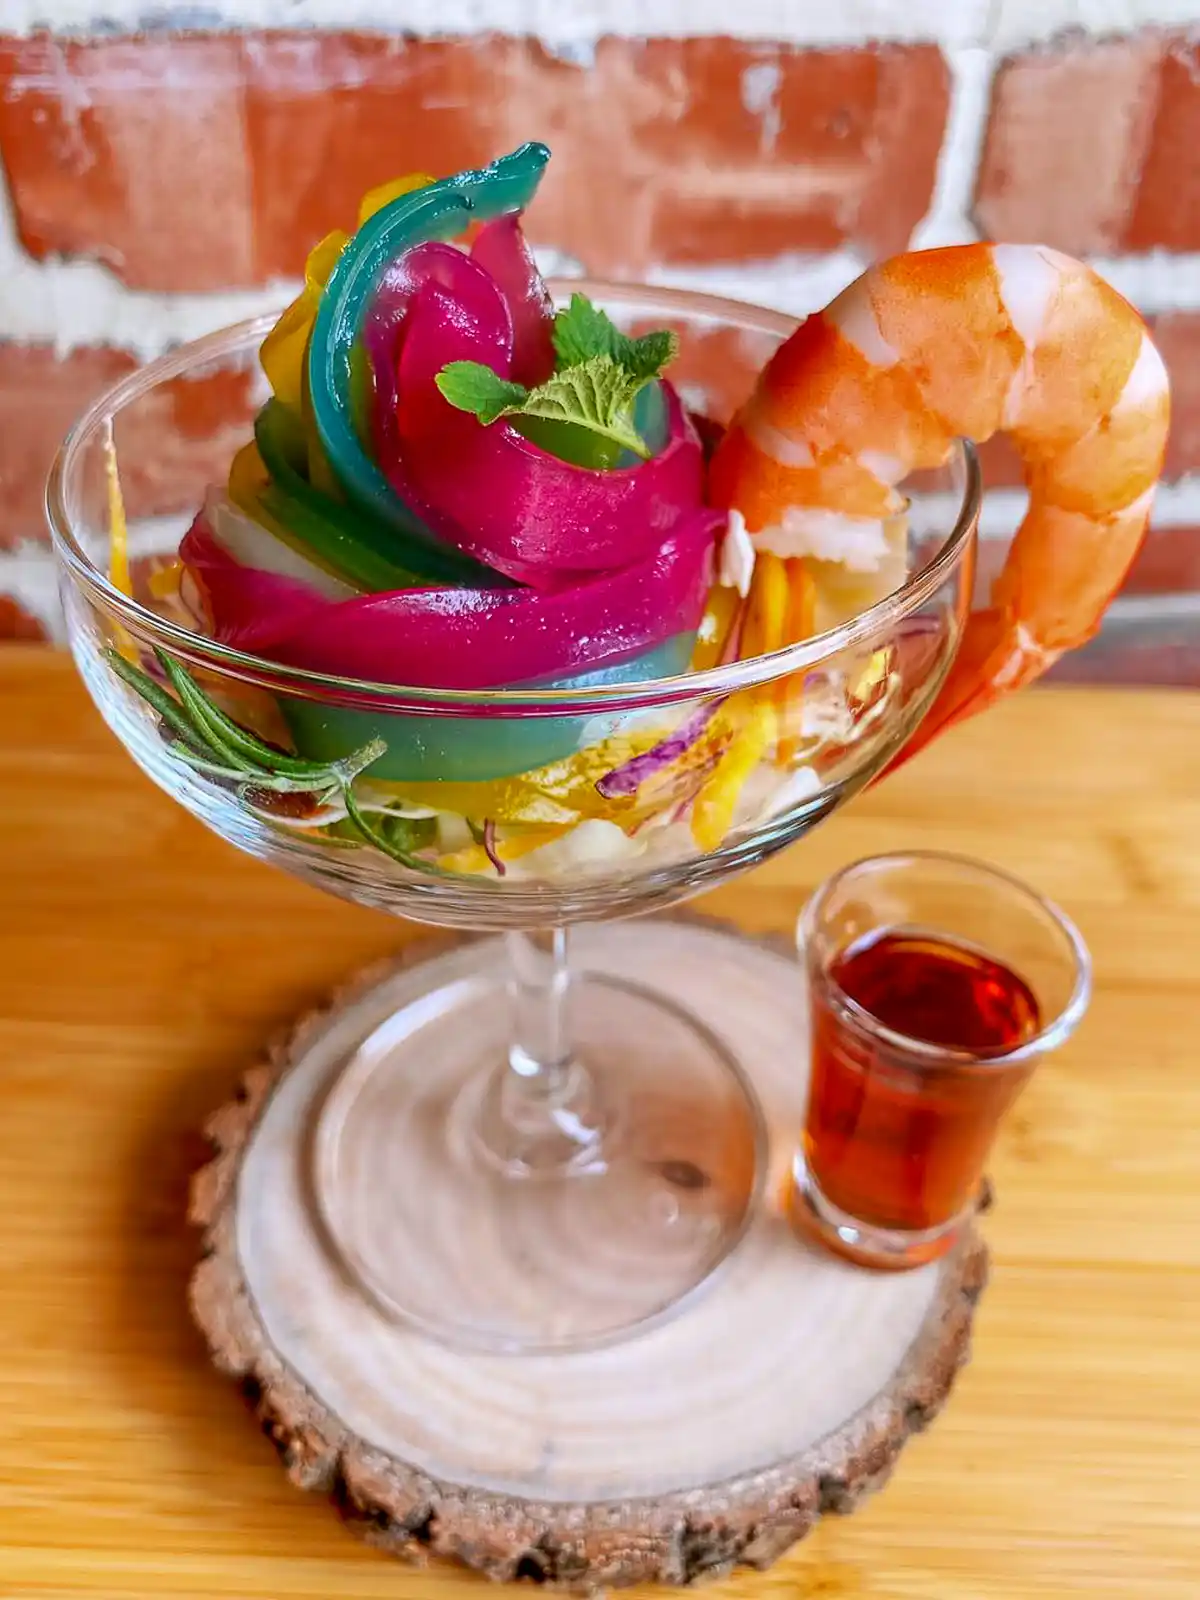 Shrimp cocktail made with rainbow noodles.